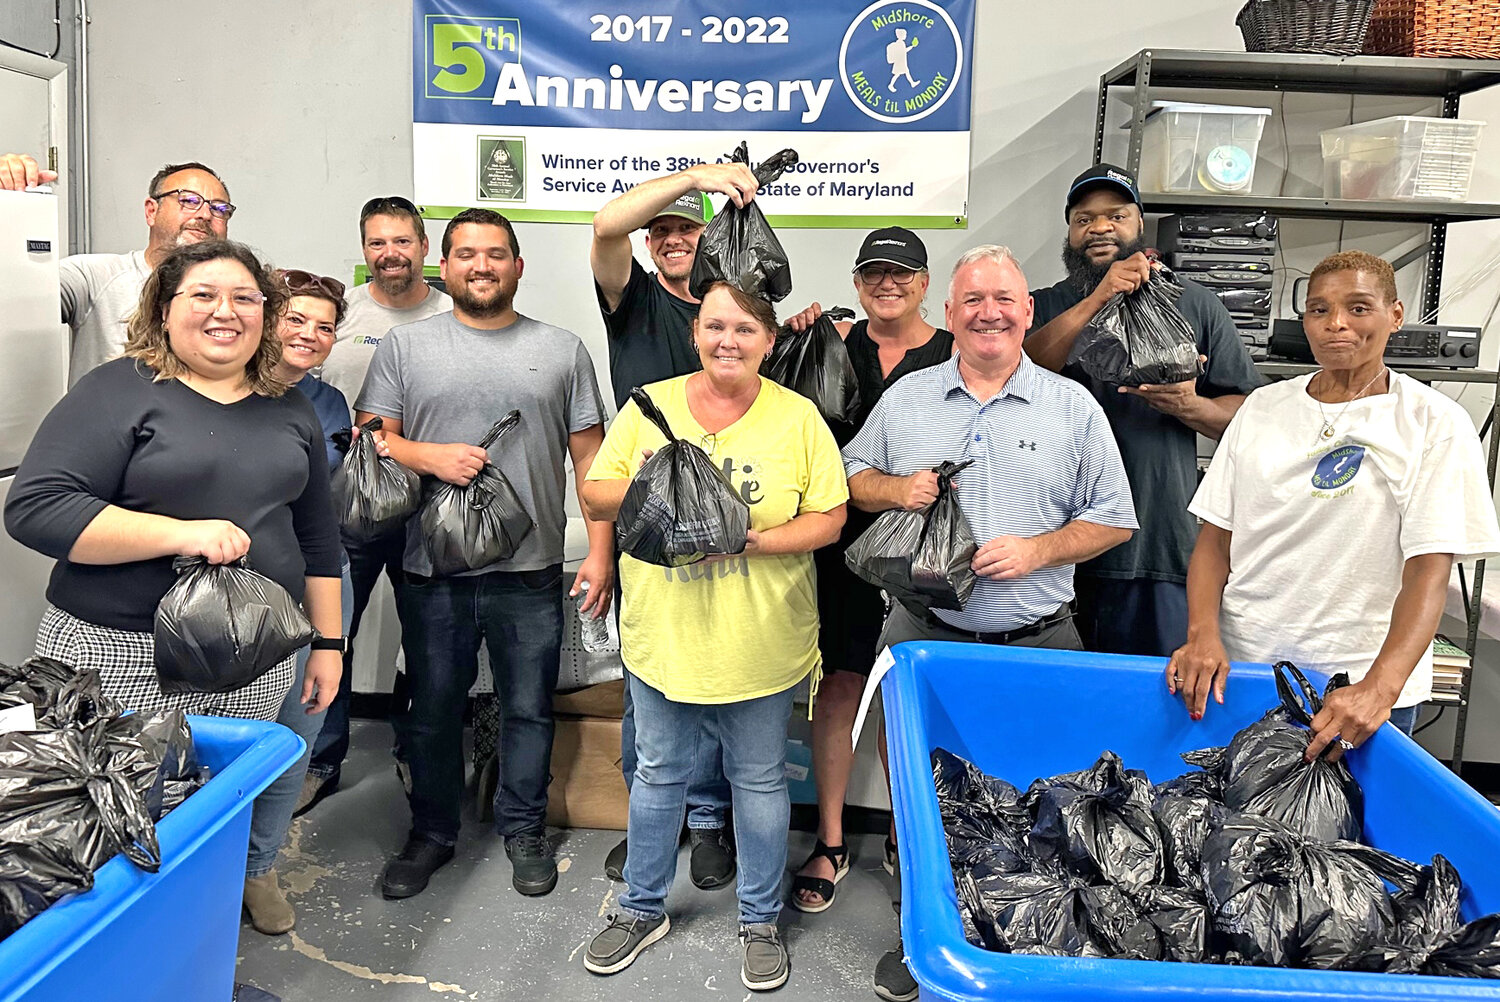 Workers from Regal Rexnord volunteered their time on Sept. 6 at MidShore Meals til Monday, an organization that provides food to schoolchildren who don’t always have enough at home. The crew helped pack 600 meals for the students of Dorchester County.